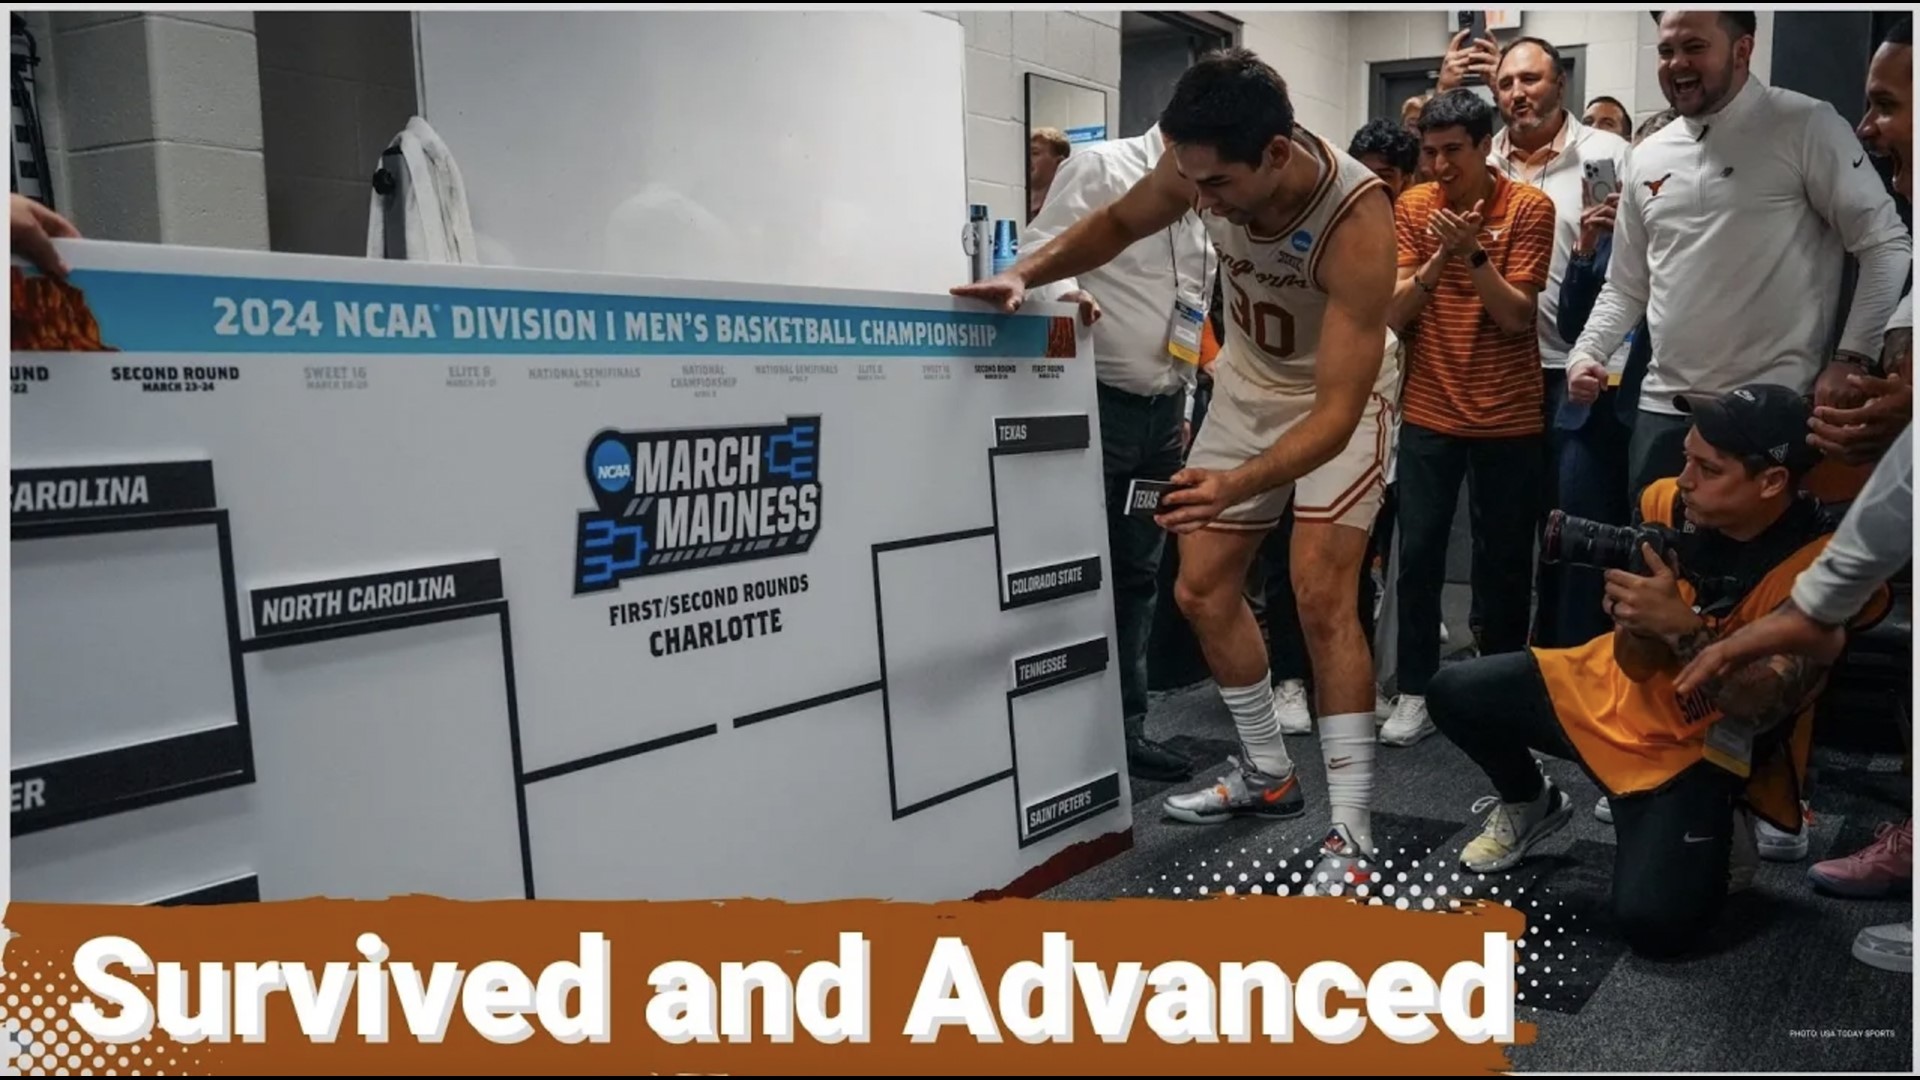 Survive and advance is the theme of this time of year and the Longhorns found a way to beat Colorado State last night in what was an ugly game for both parties.